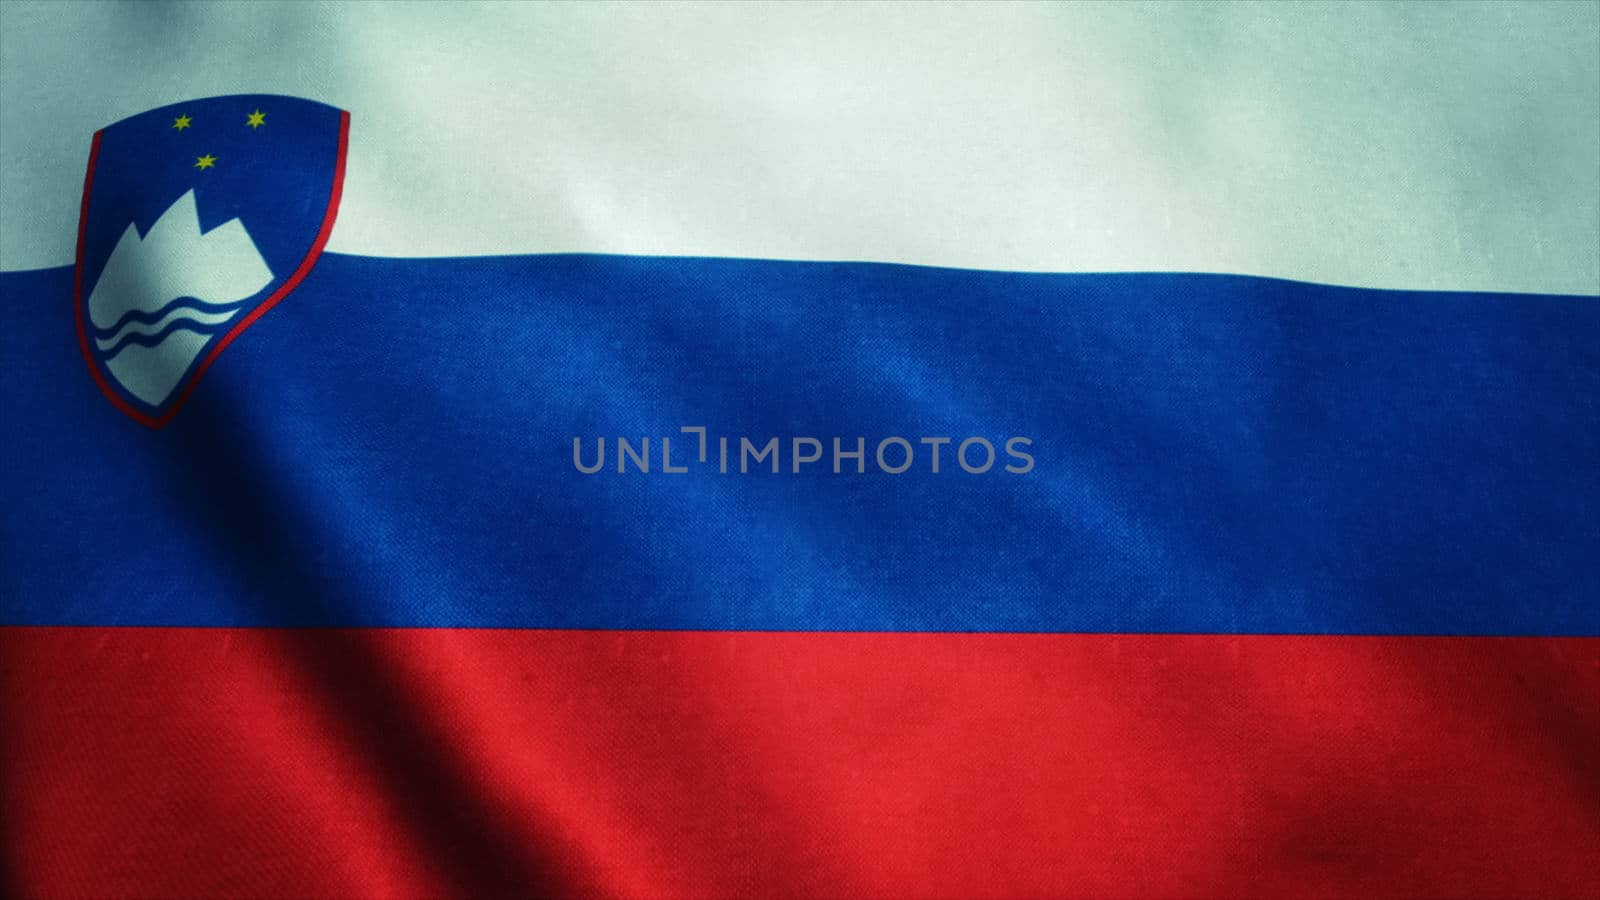 Realistic Ultra-HD flag of the Slovenia waving in the wind. Seamless loop with highly detailed fabric texture. Loop ready in 4k resolution.